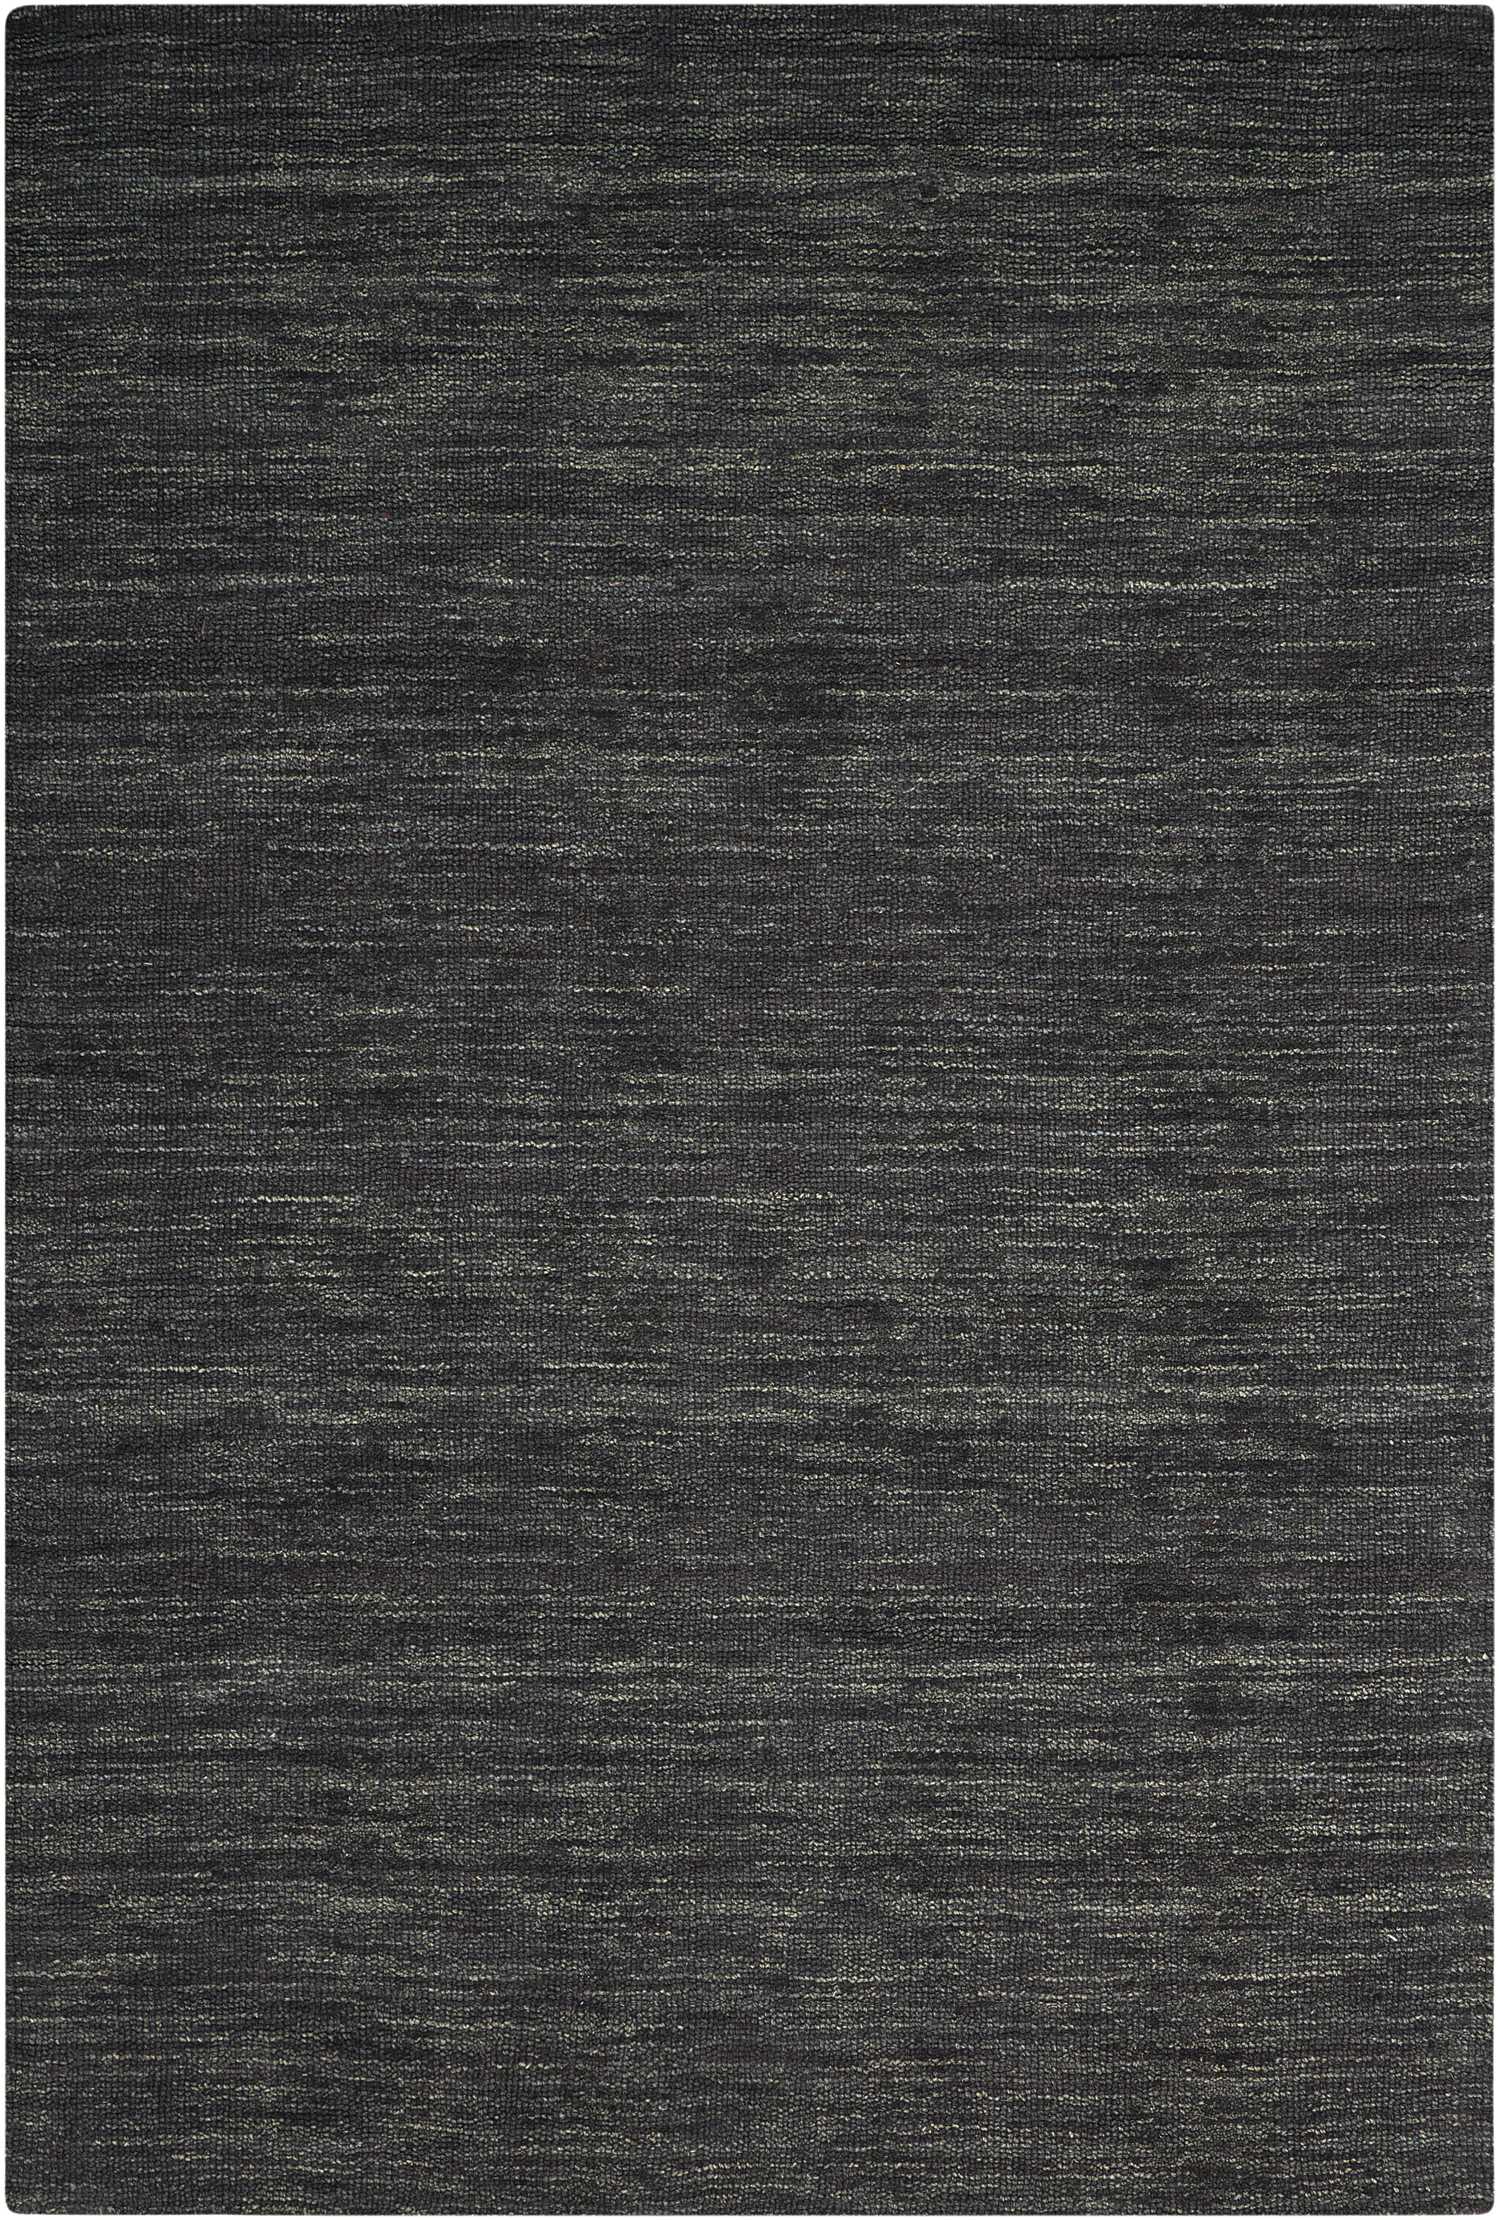 Waverly Grand Suite WGS01 Charcoal Contemporary Woven Rug